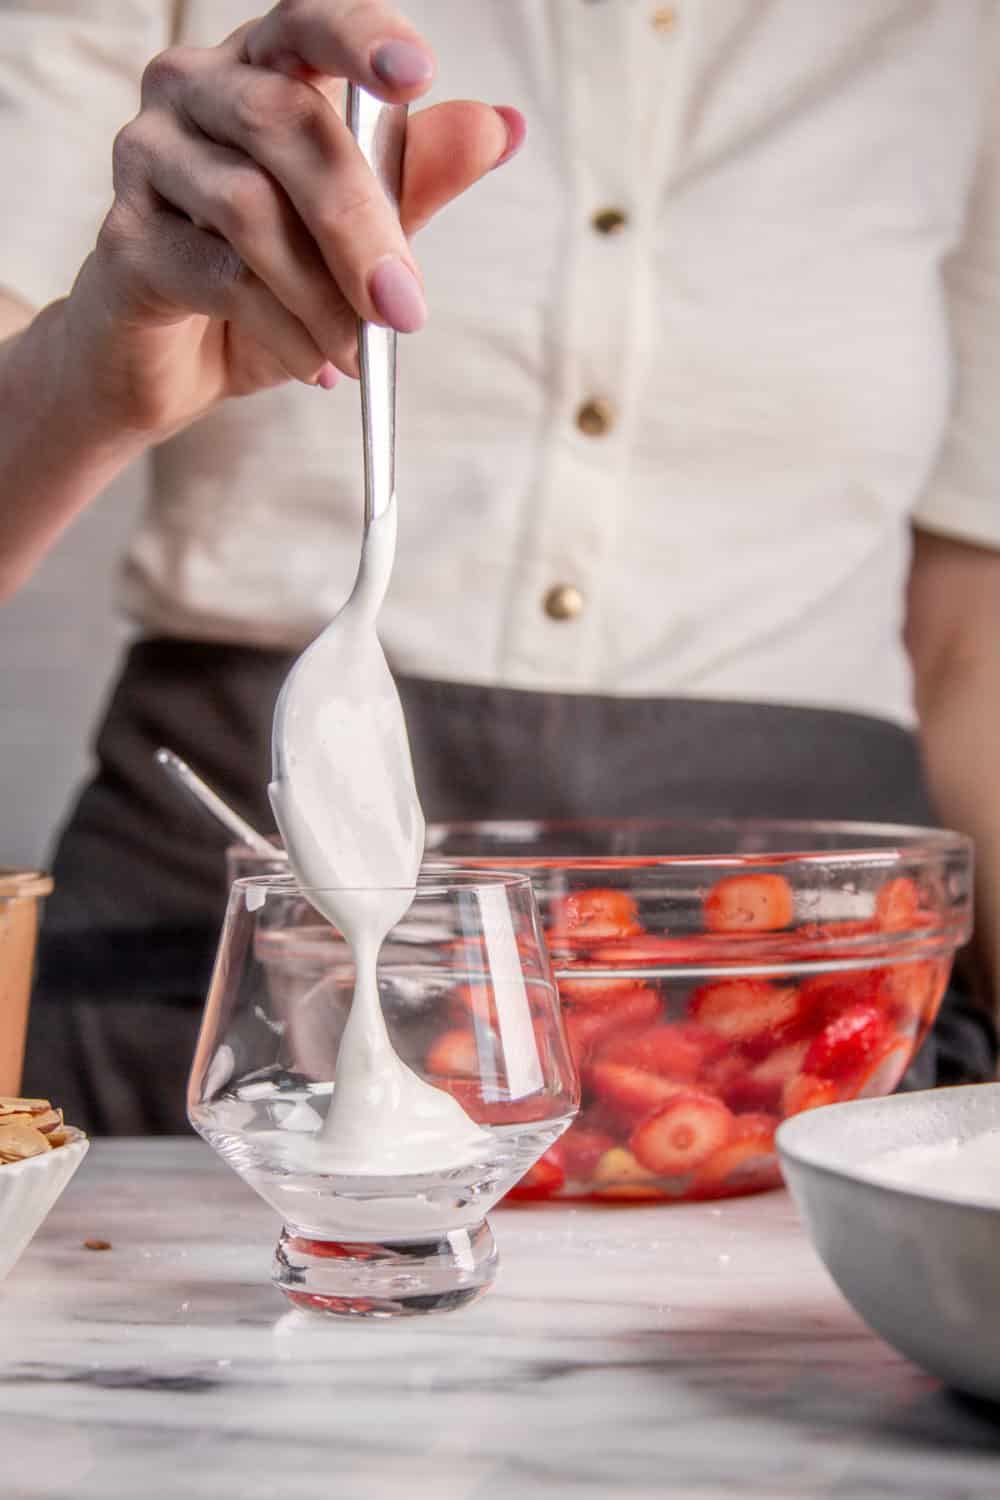 Adding whipped cream to a serving glass for eton mess.